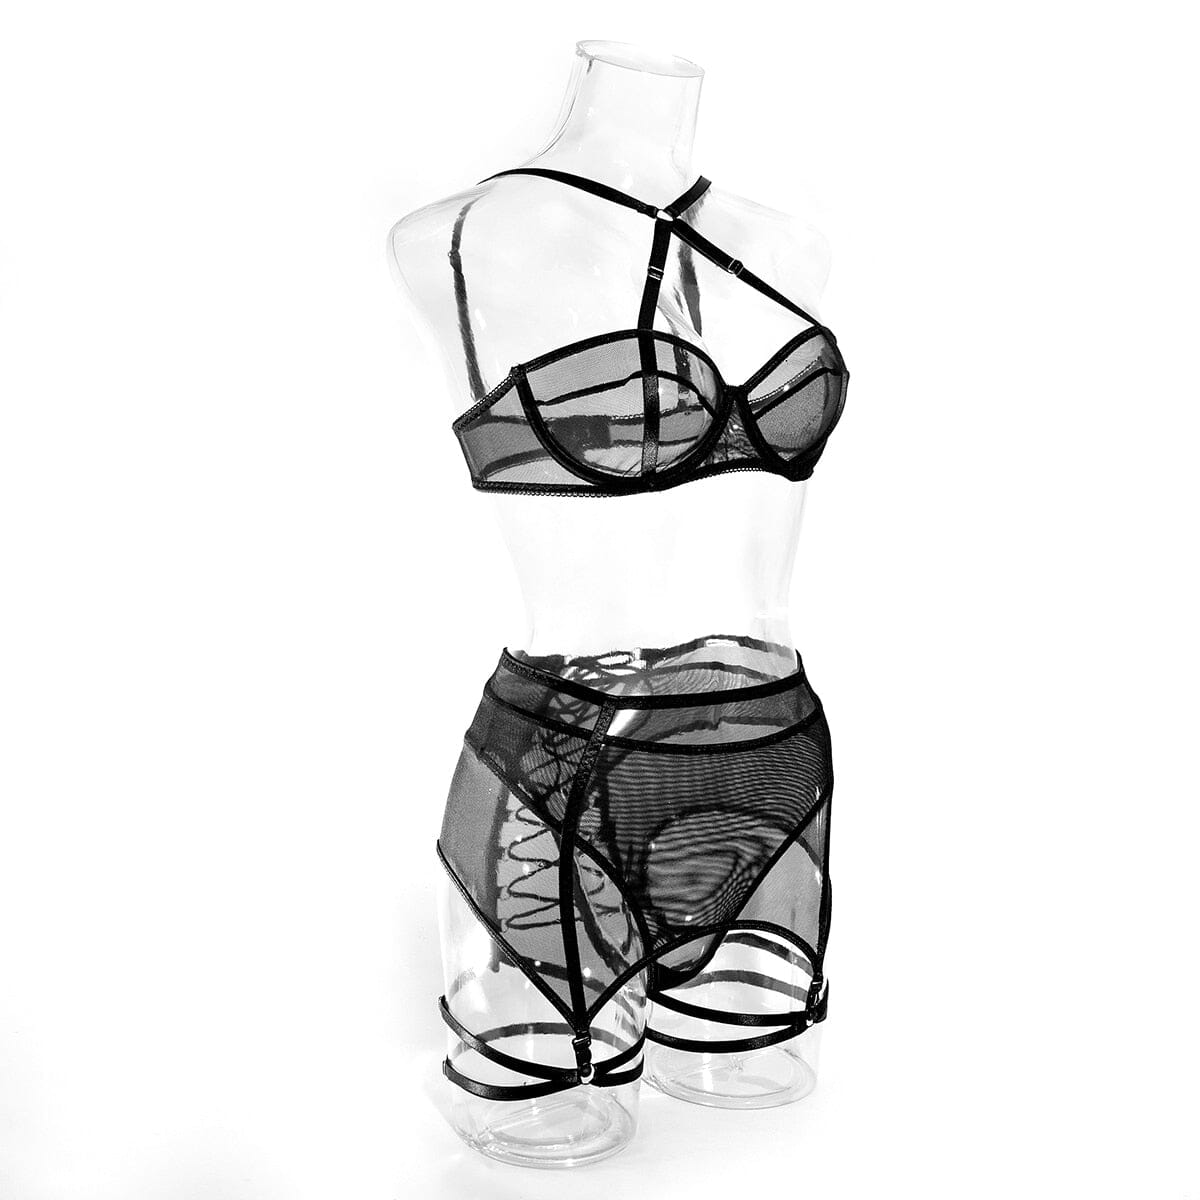 With Stockings Transparent Bra Intimate 3-Piece Black Lingerie Accessories BlissGown 